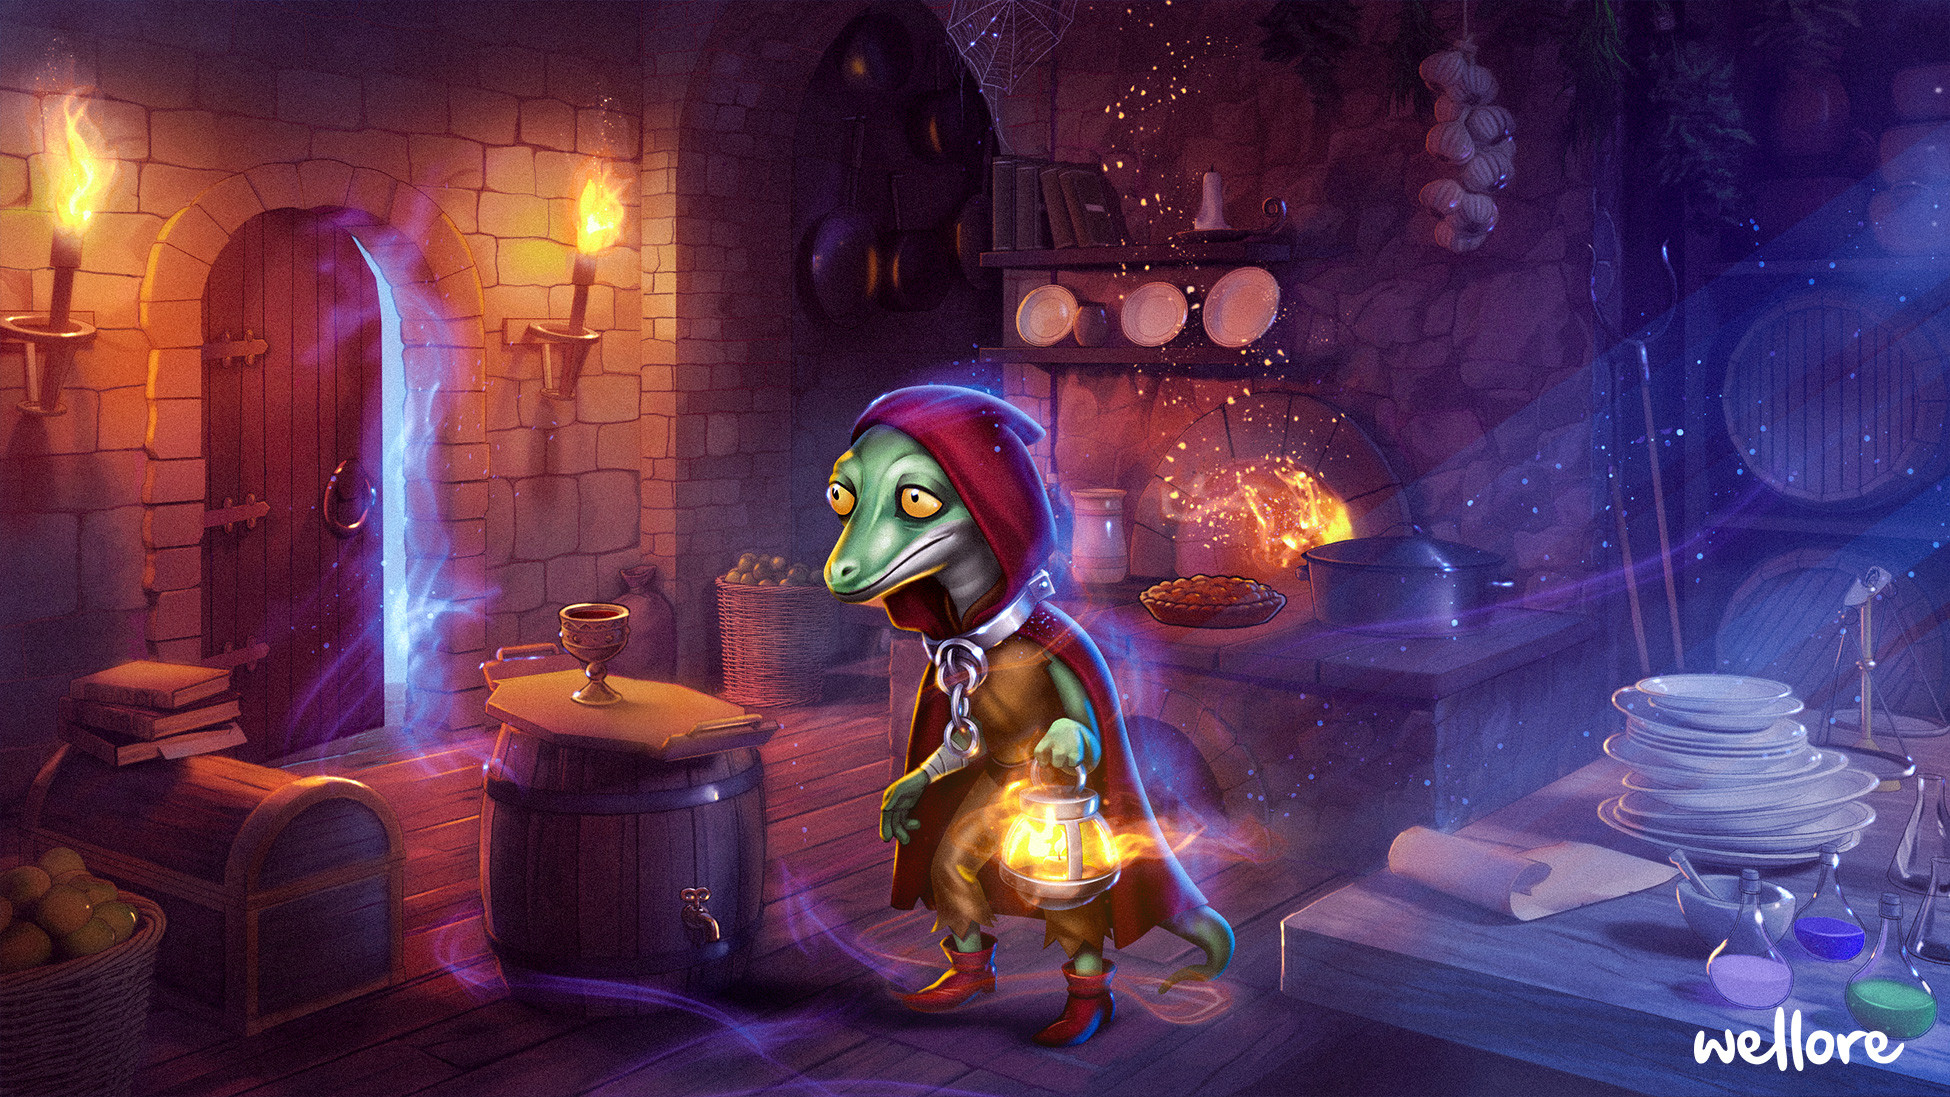 The Snow Fable: Mystery of the Flame  | Wellore, Alawar Entertainment (https://store.steampowered.com/app/2019650/The_Snow_Fable_Mystery_of_the_Flame) | Character and Background